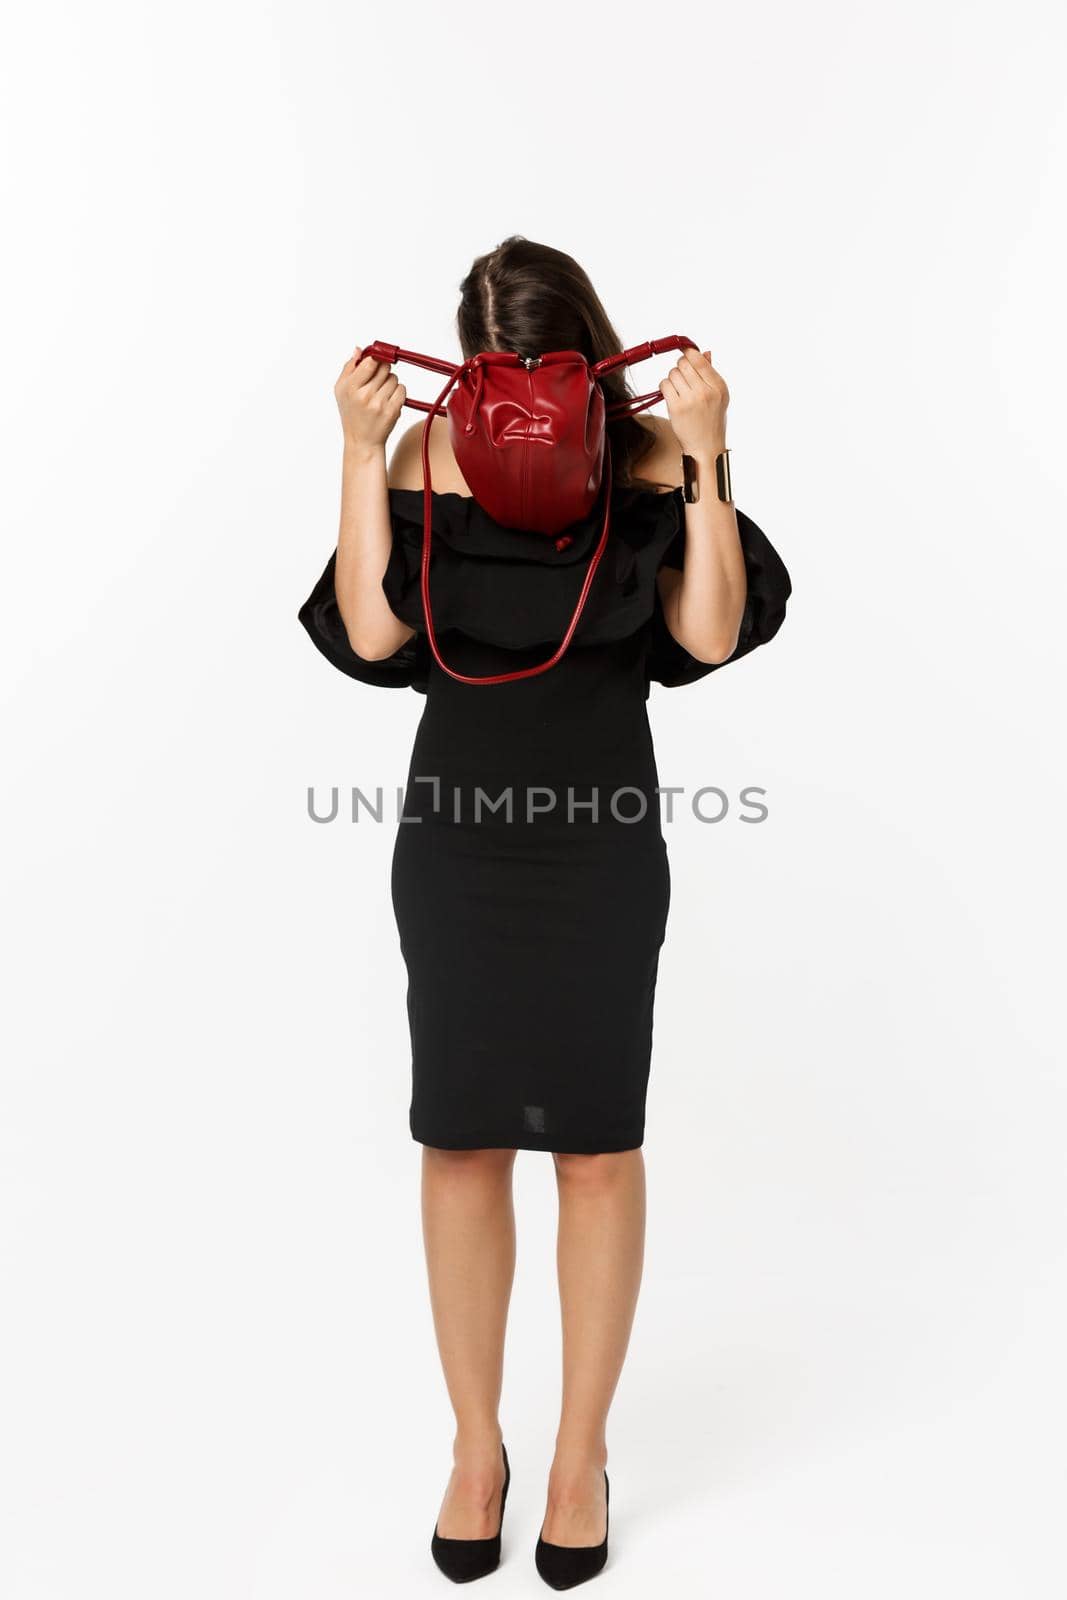 Beauty and fashion concept. Full length of young woman sticking head inside purse and searching something, wearing black dress and high heels, standing over white background.